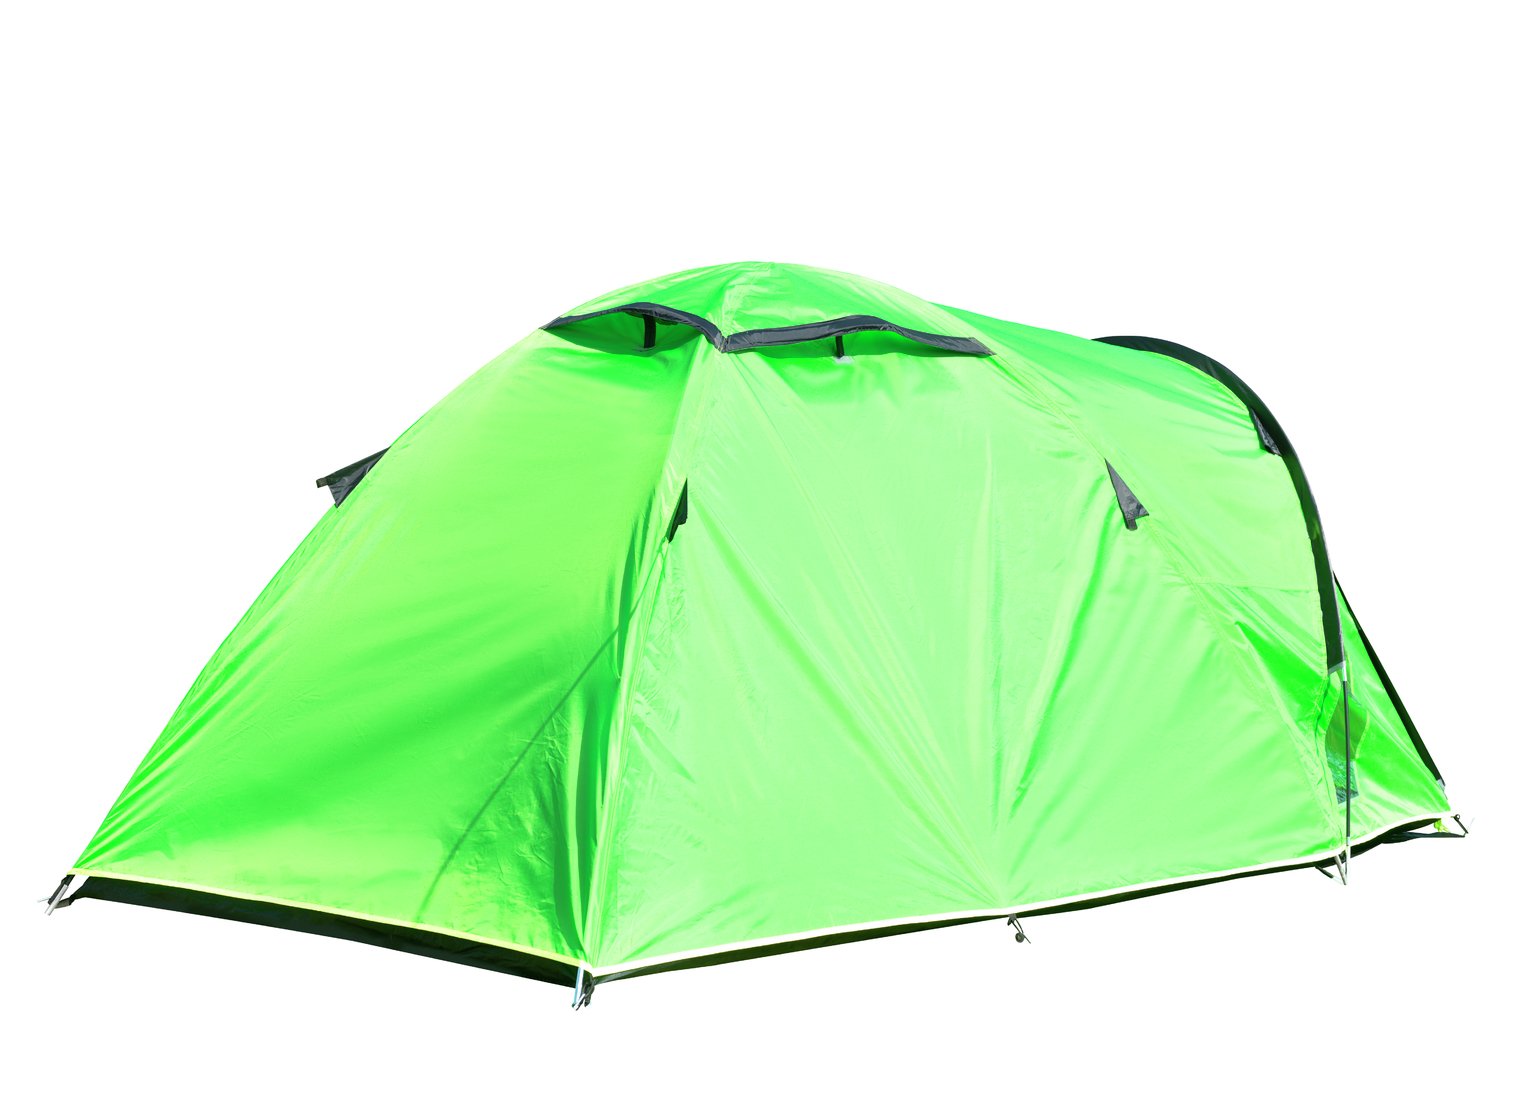 Pro Action 2 Person 1 Room Dome Camping Tent - Green